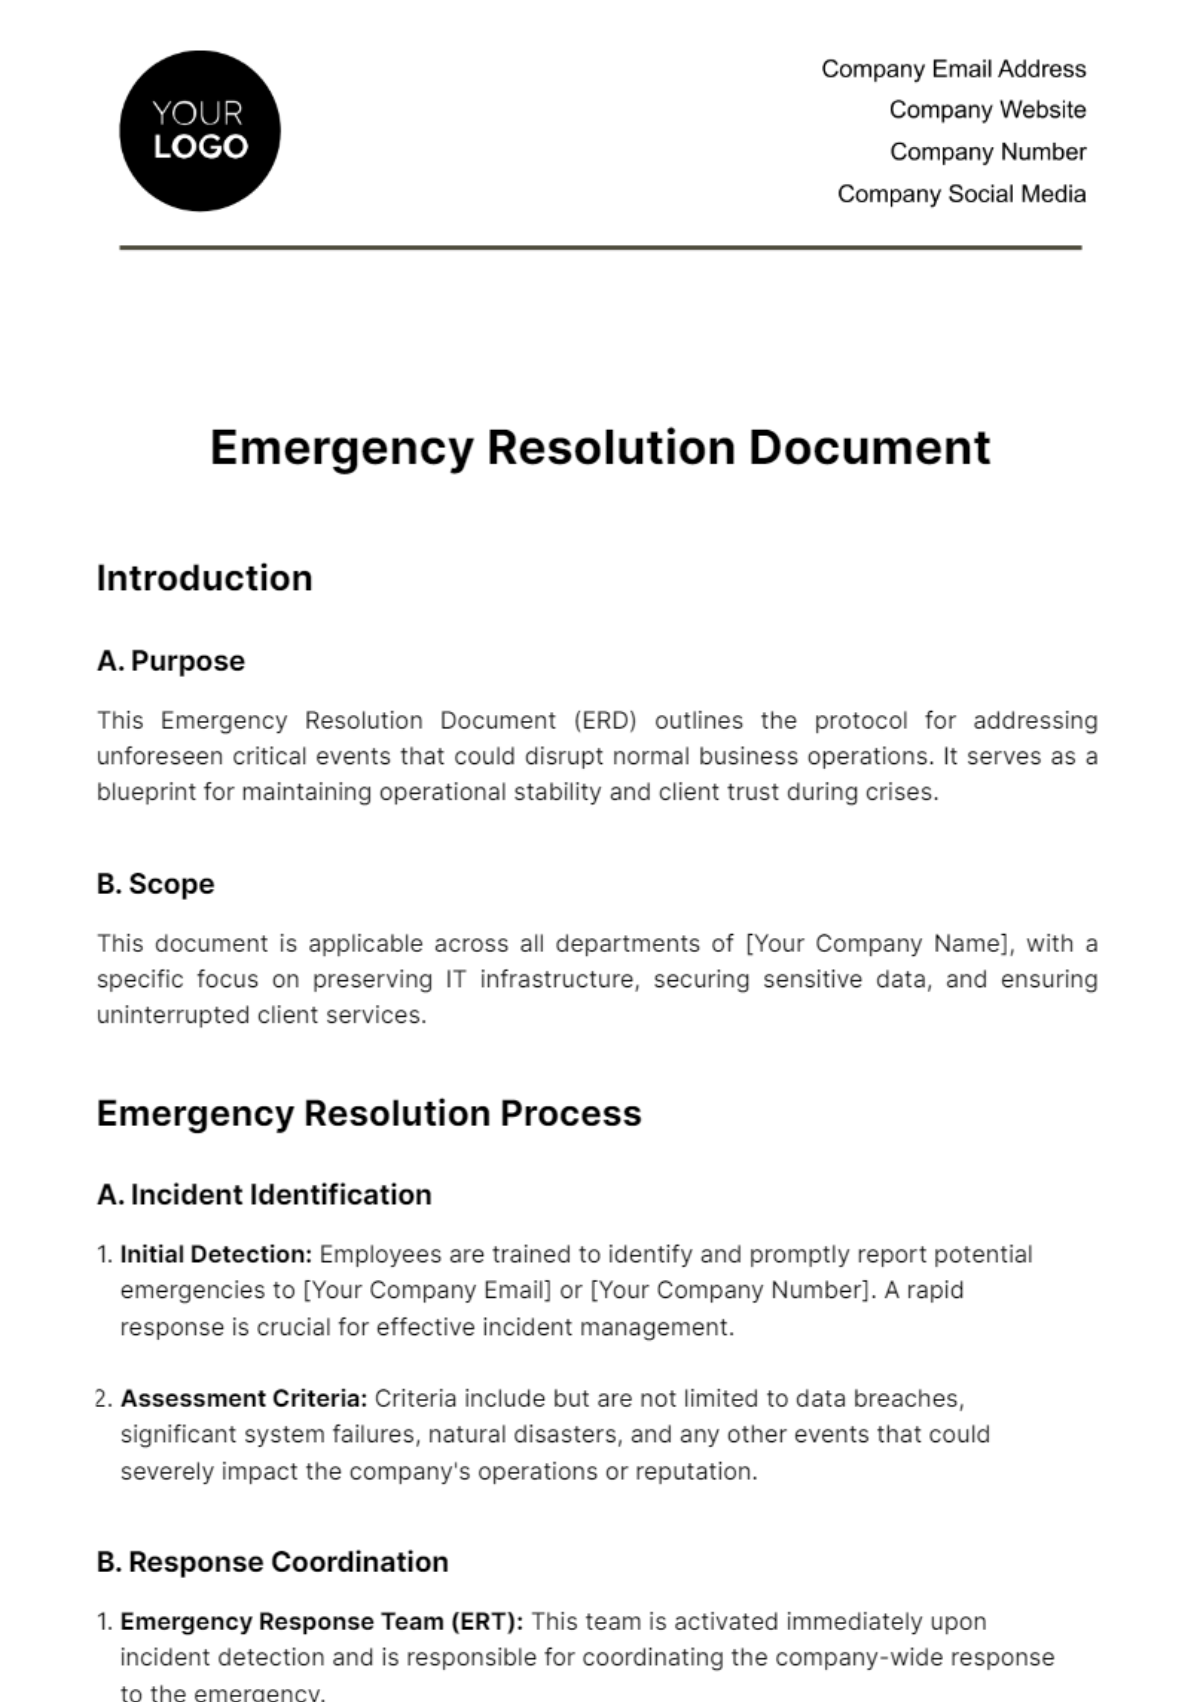 Emergency Resolution Document Template